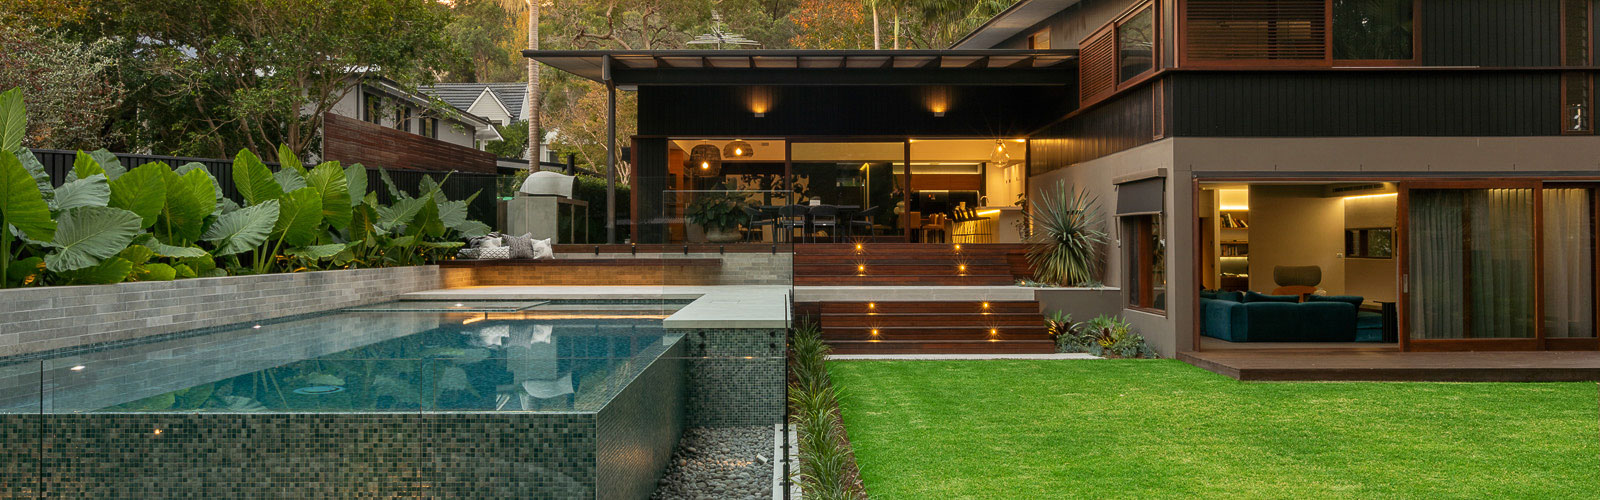 Pool design in Manly - Sydney, NSW